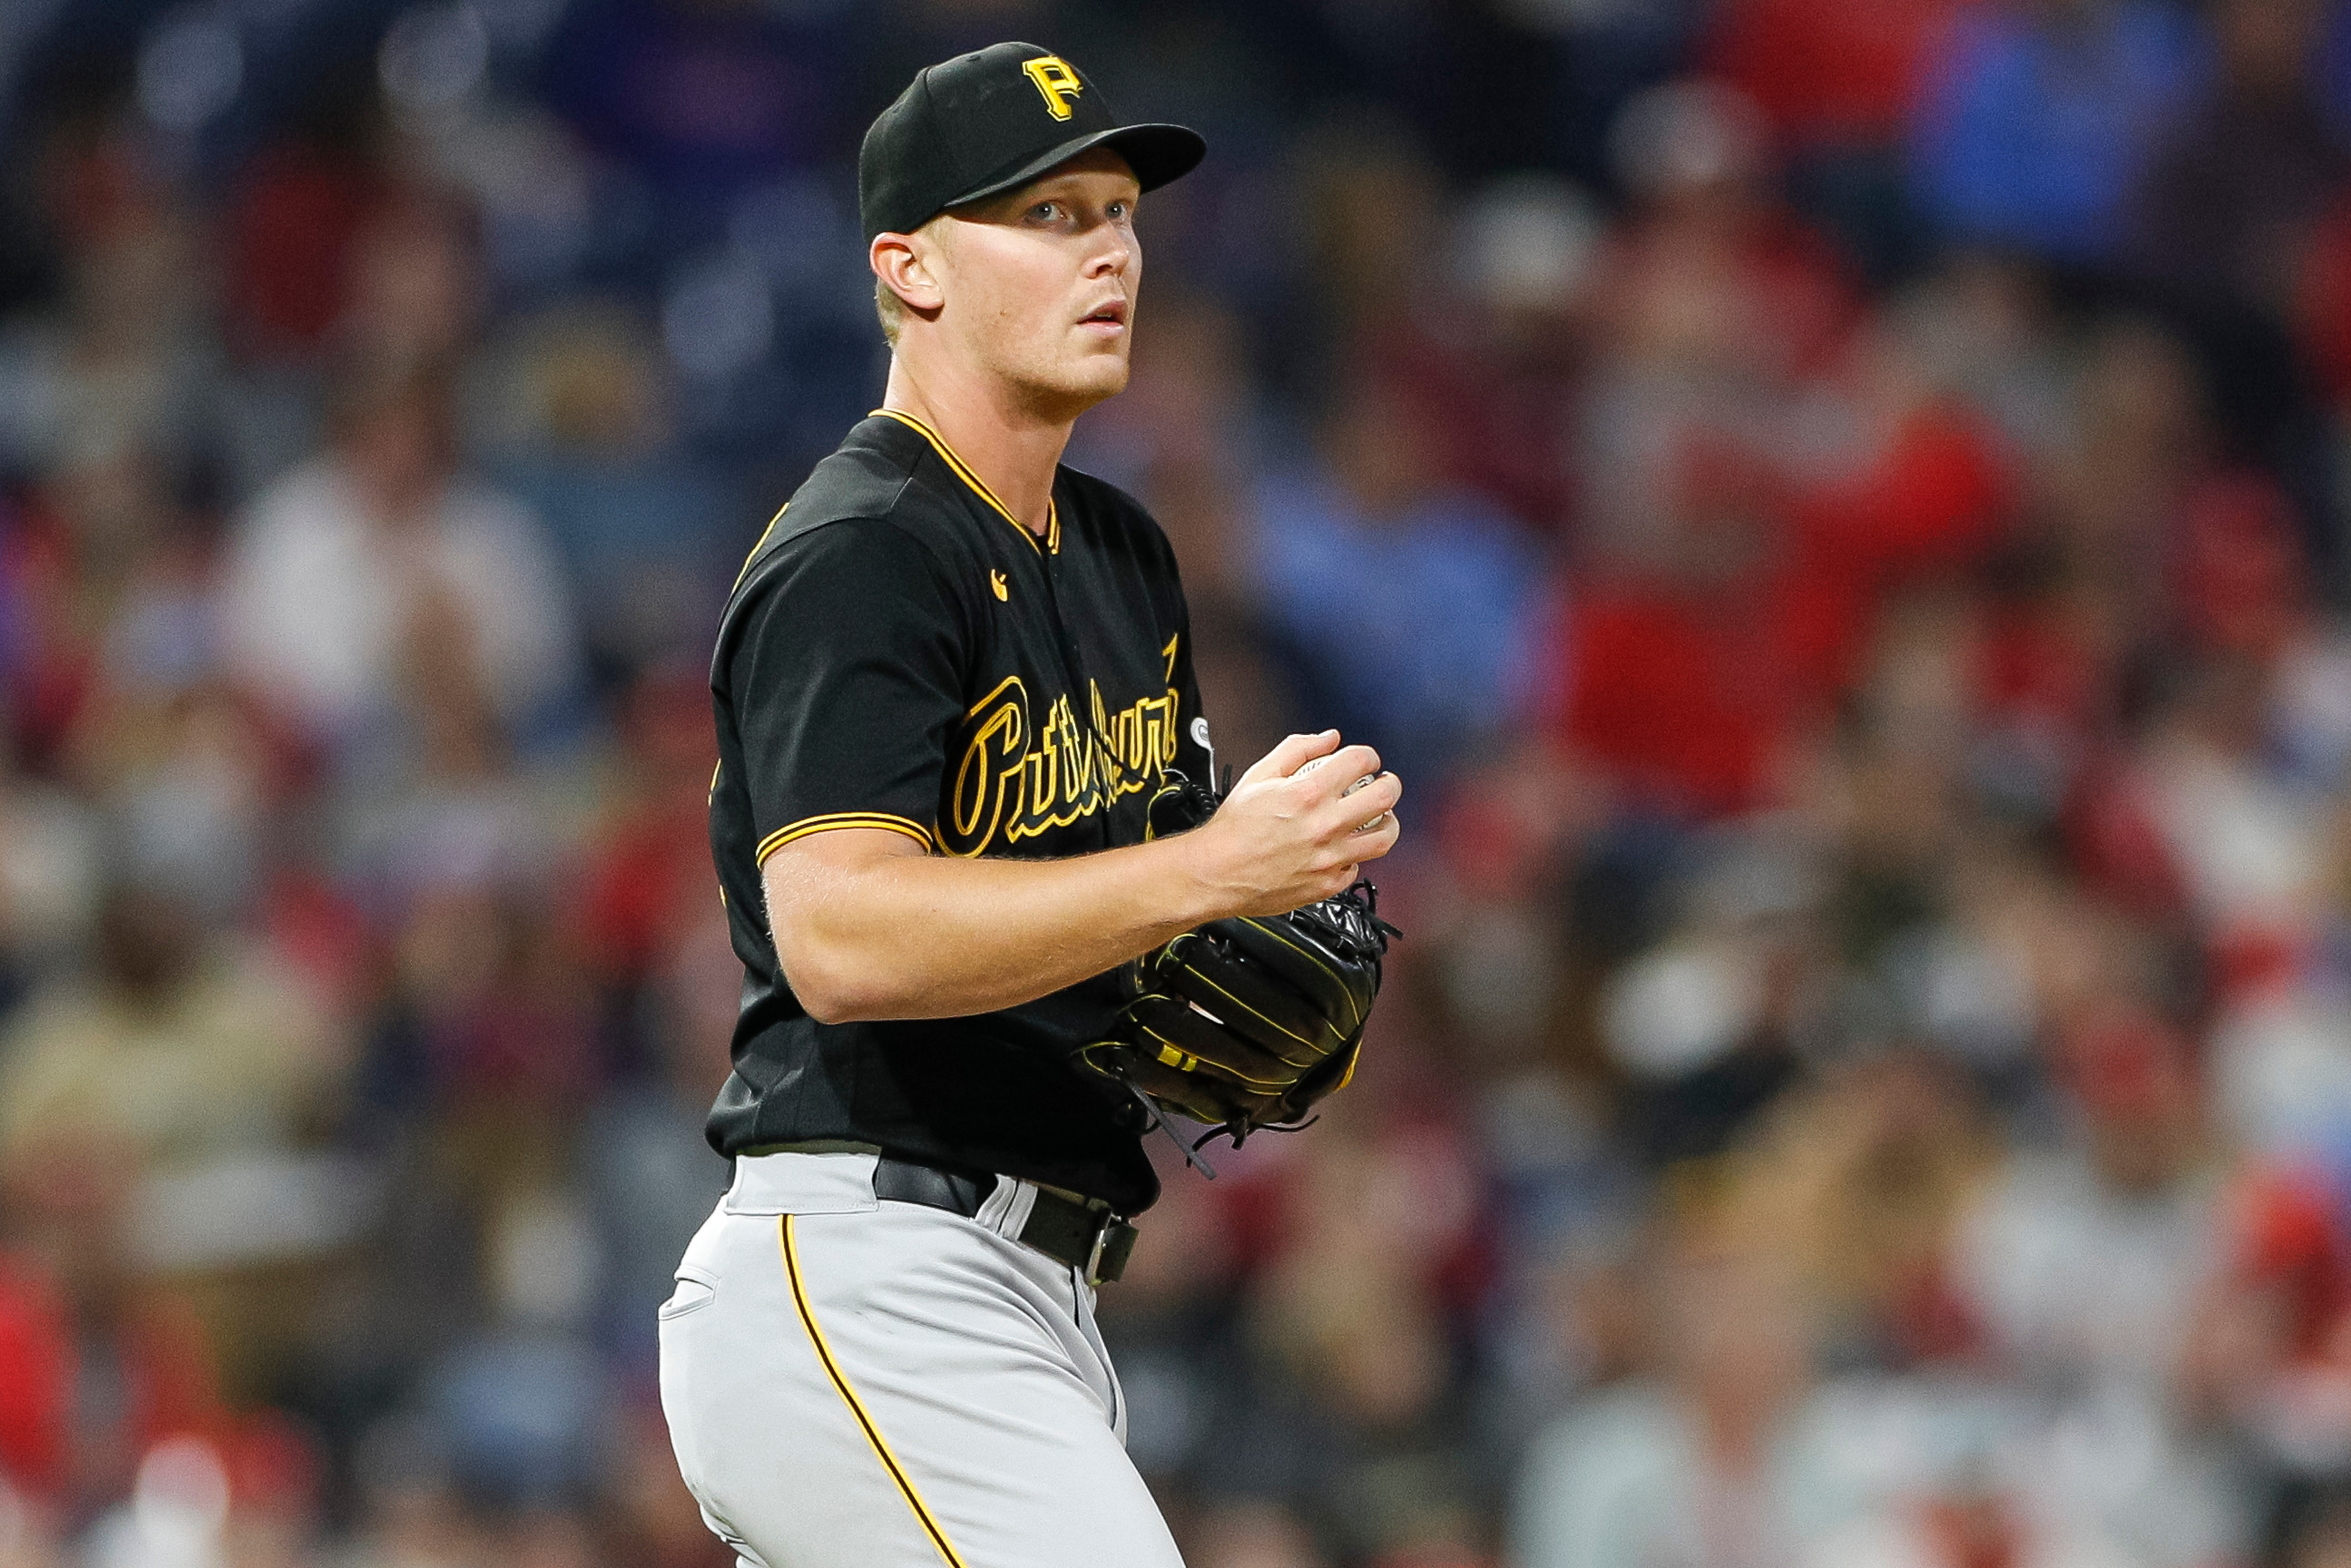 Report: Pirates, OF Bryan Reynolds agree to 8-year contract extension